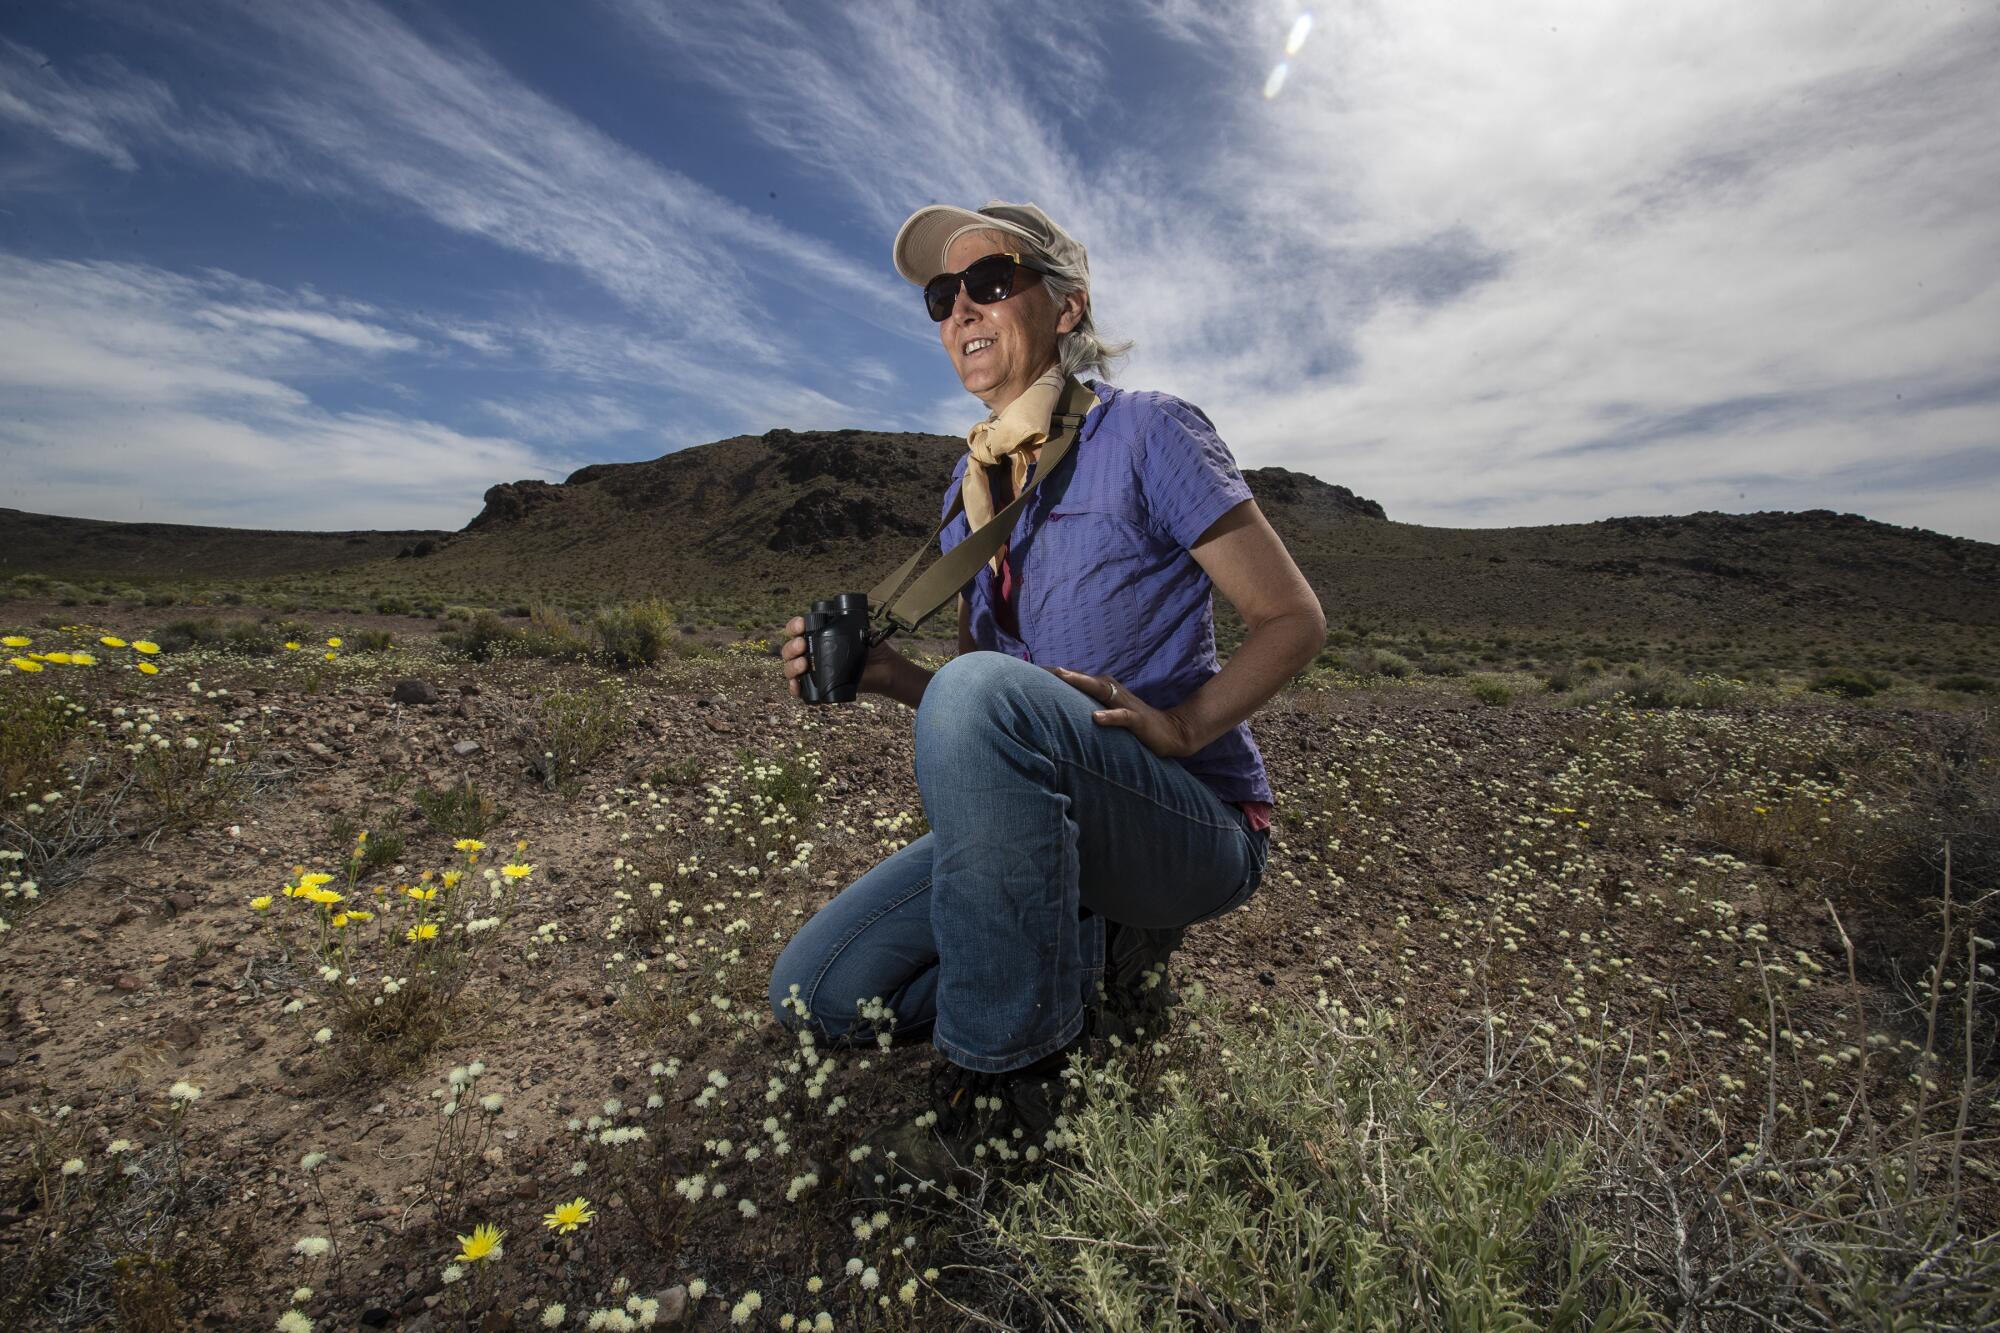 Laura Cunningham, California director of the nonprofit Western Watersheds Project, sits among wildflowers in the Mojave Desert near the town of Beatty, Nev.